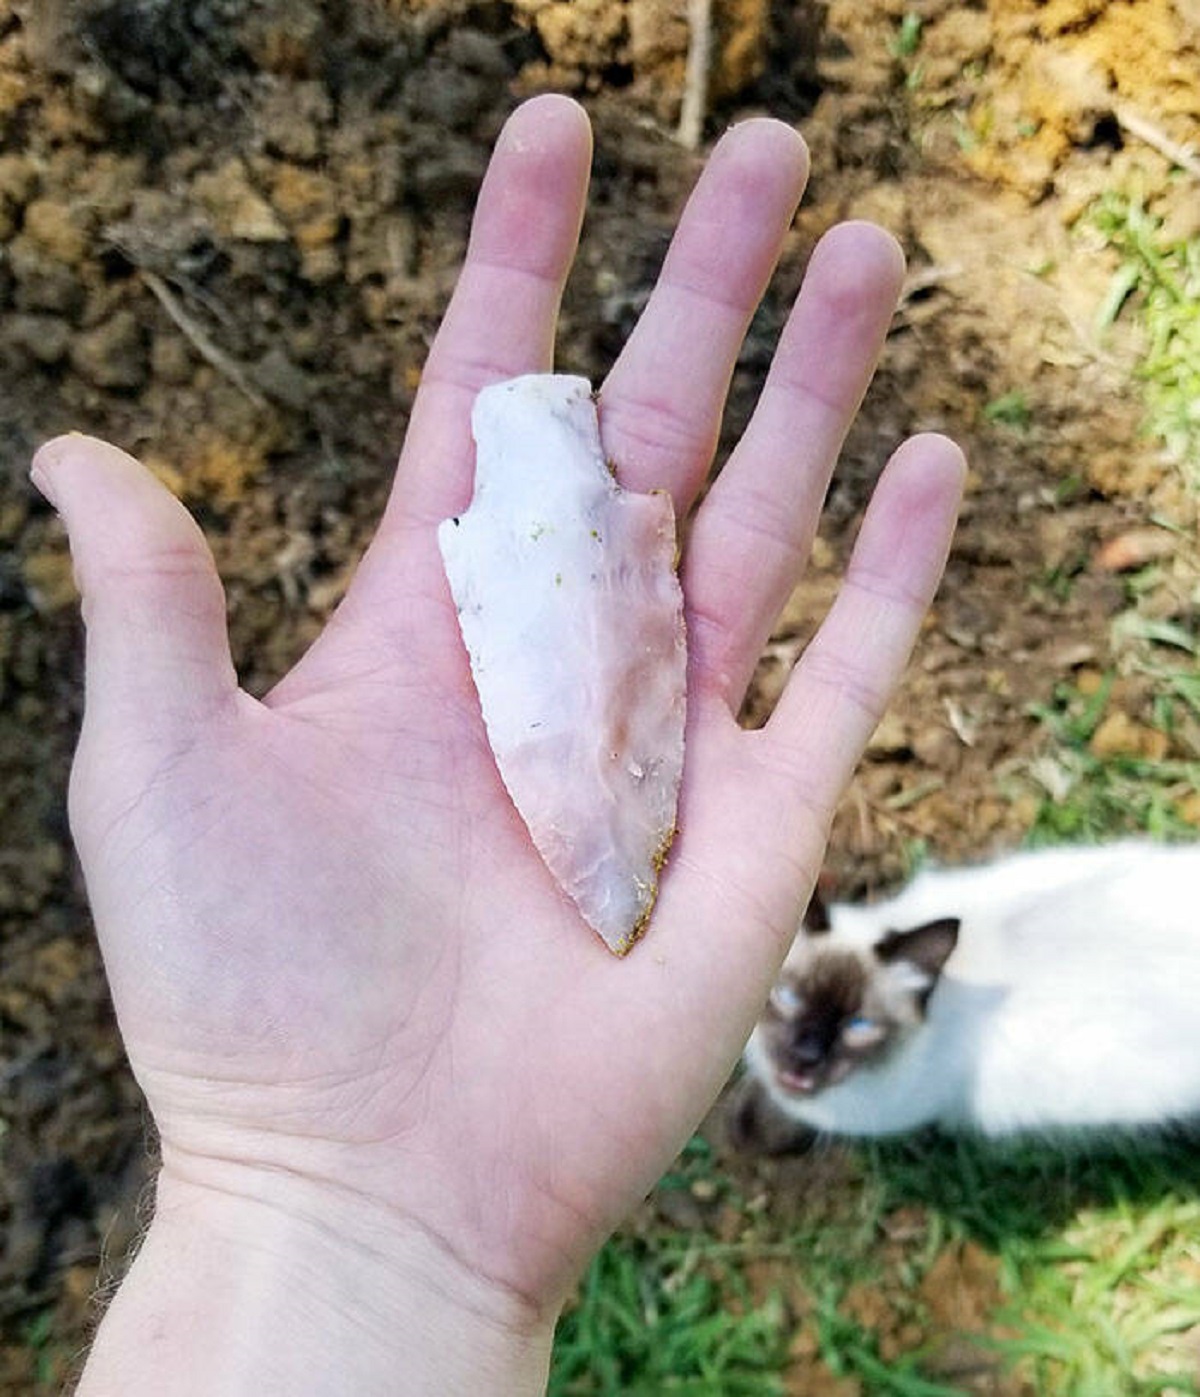 "I Found This Arrowhead While Digging A Hole In My Backyard"